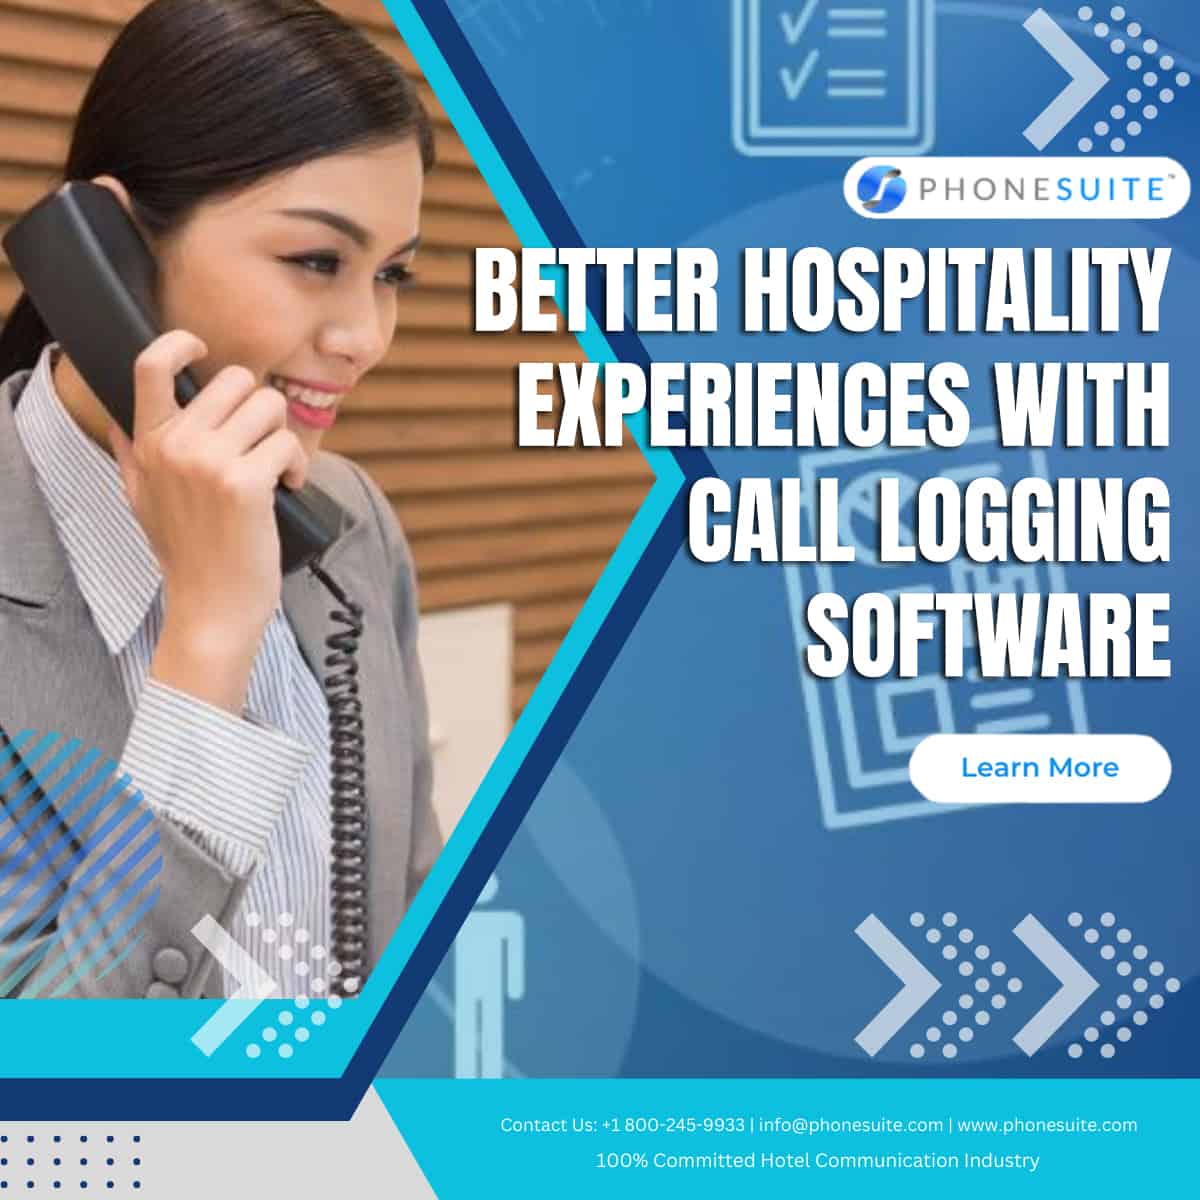 Better Hospitality Experiences with Call Logging Software